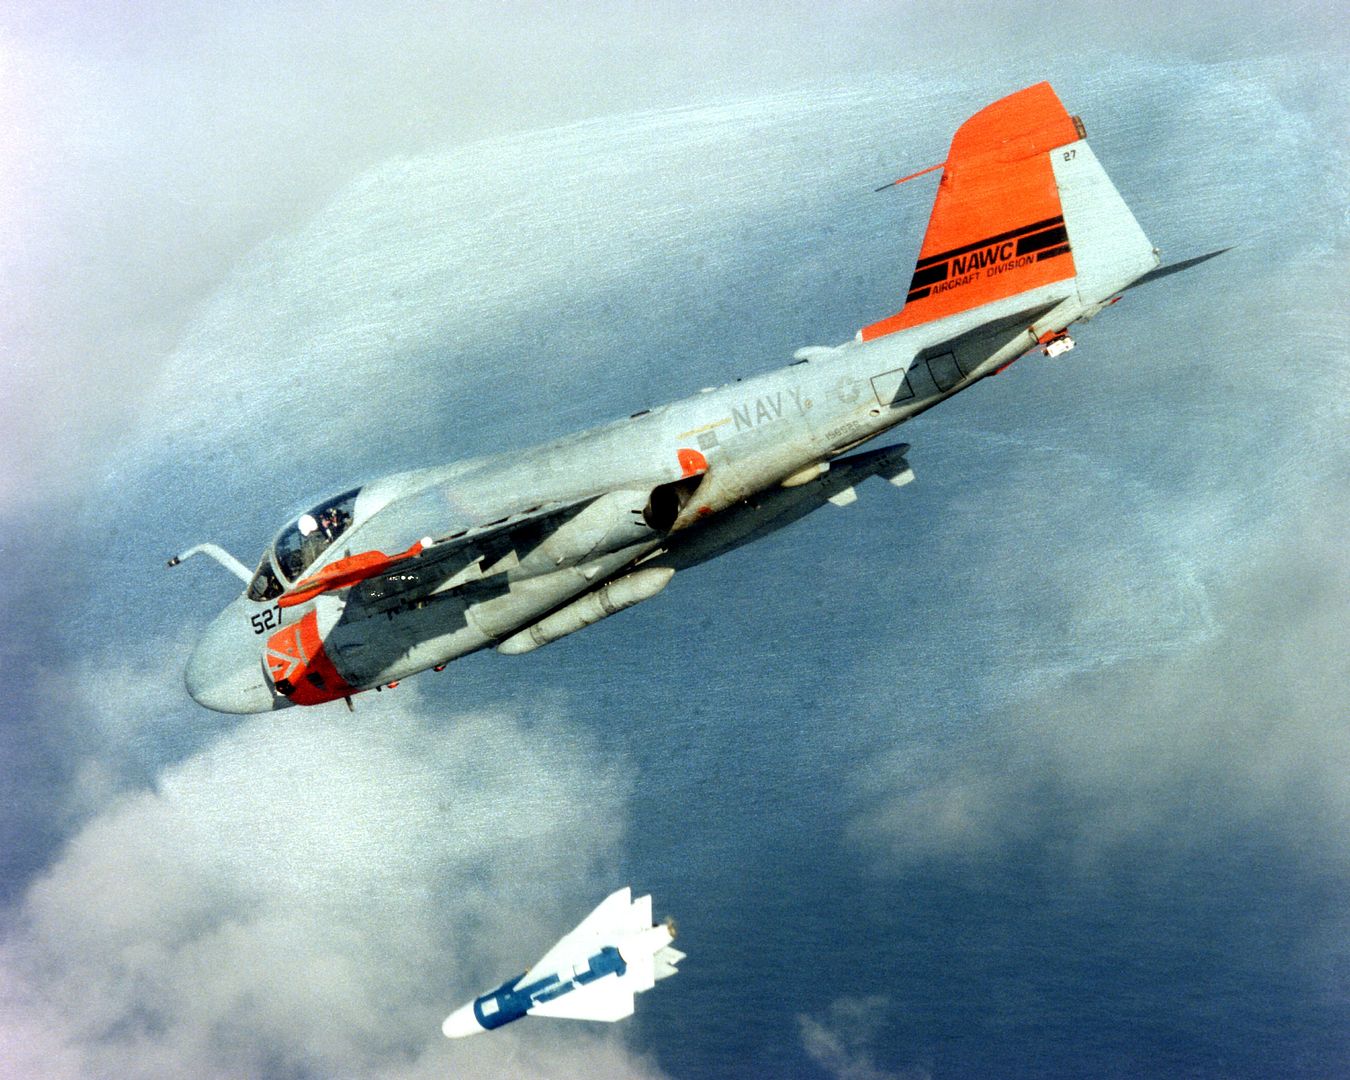 An A 6E Intruder Aircraft From The Naval Air Warfare Center Aircraft Division Pax River Ordnance Systems Department Released A Walleye II Extended Range Data Link Missile Over The Atlantic Ocean